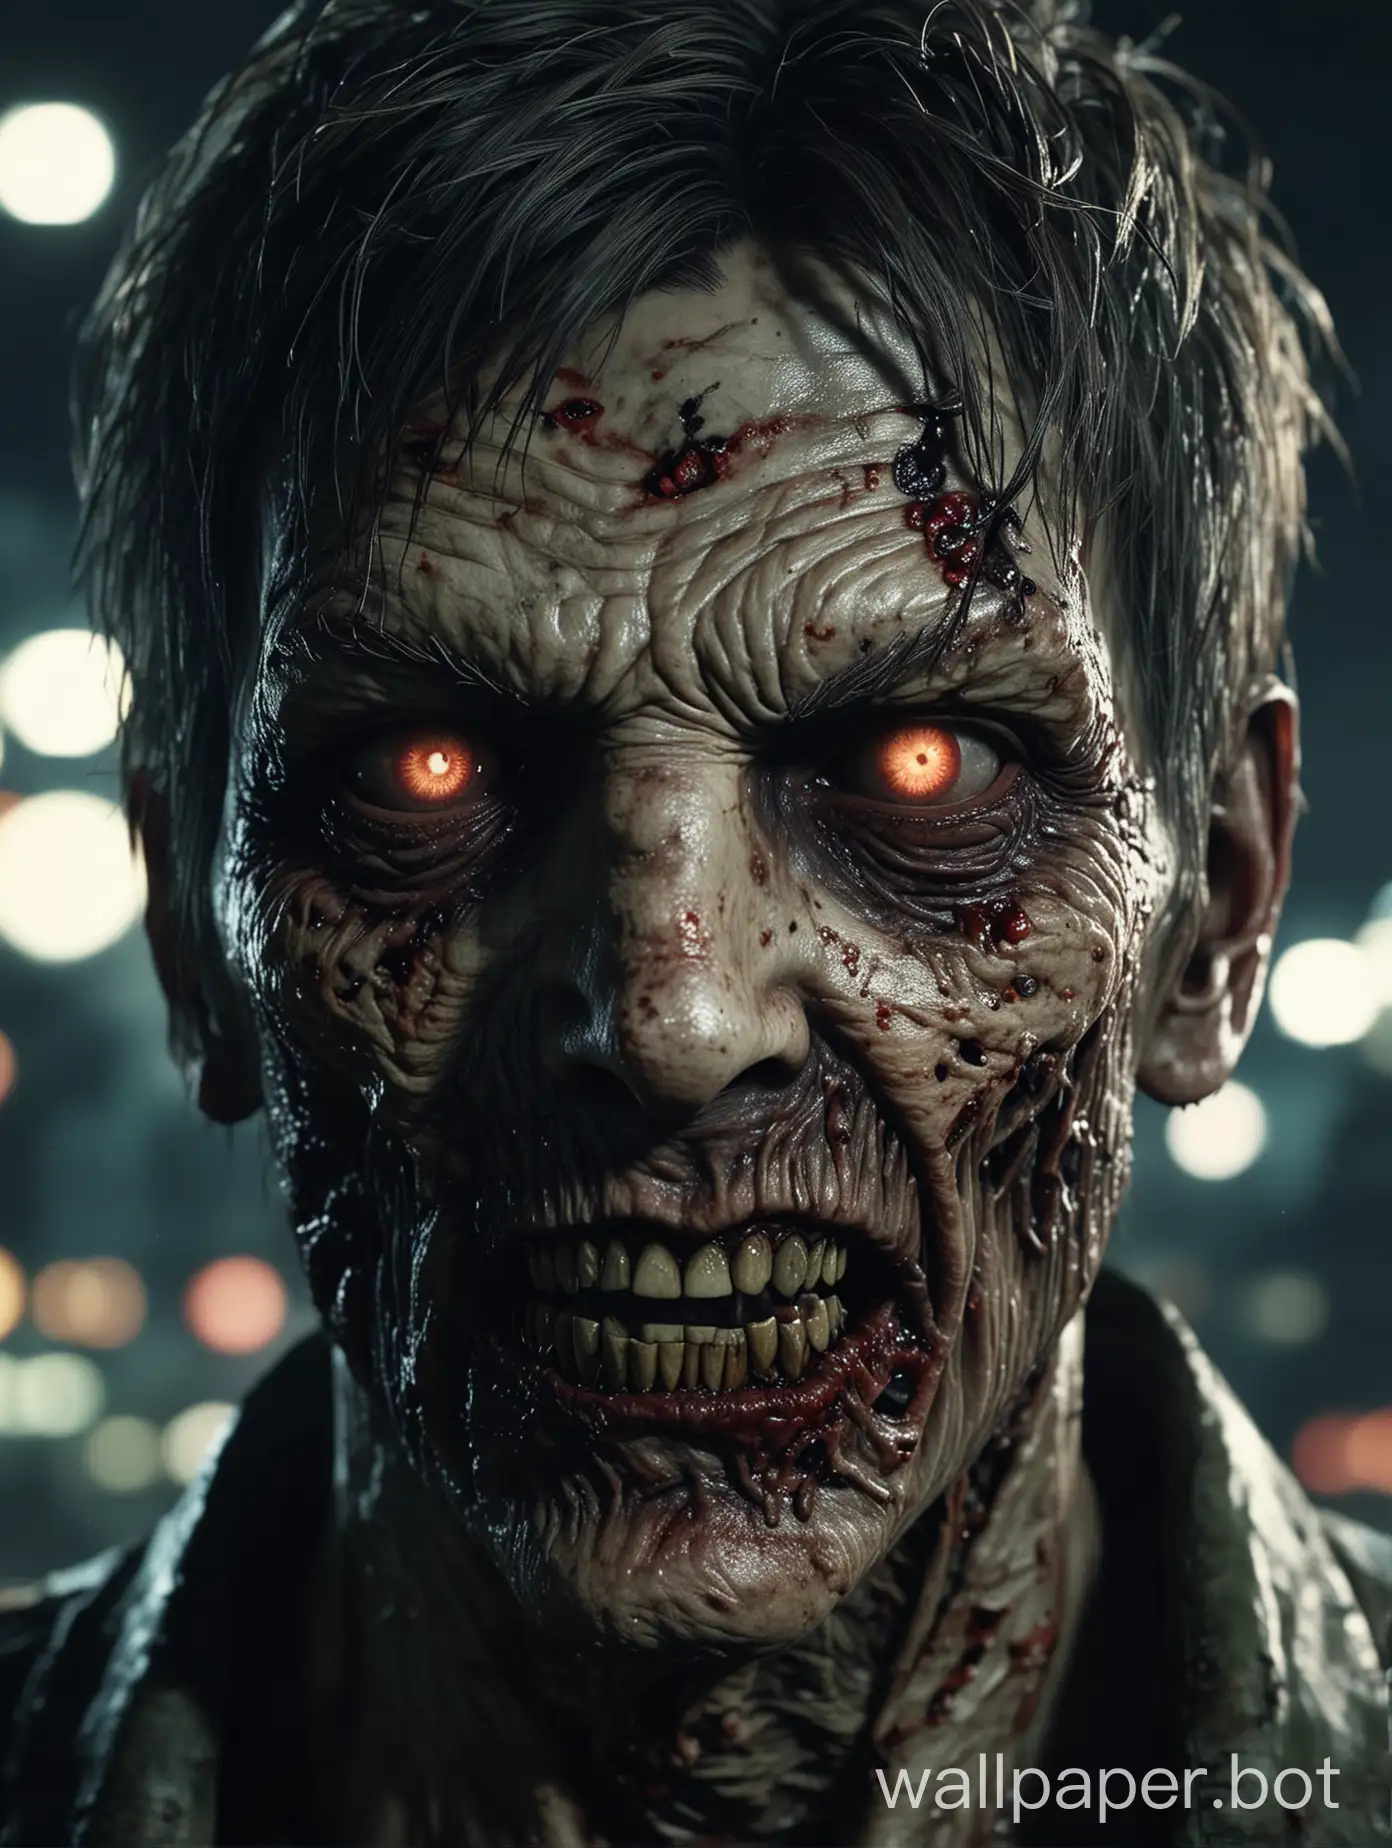 Detailed-CloseUp-of-Creepy-Zombie-Face-Against-Blurred-Night-Cityscape-Background